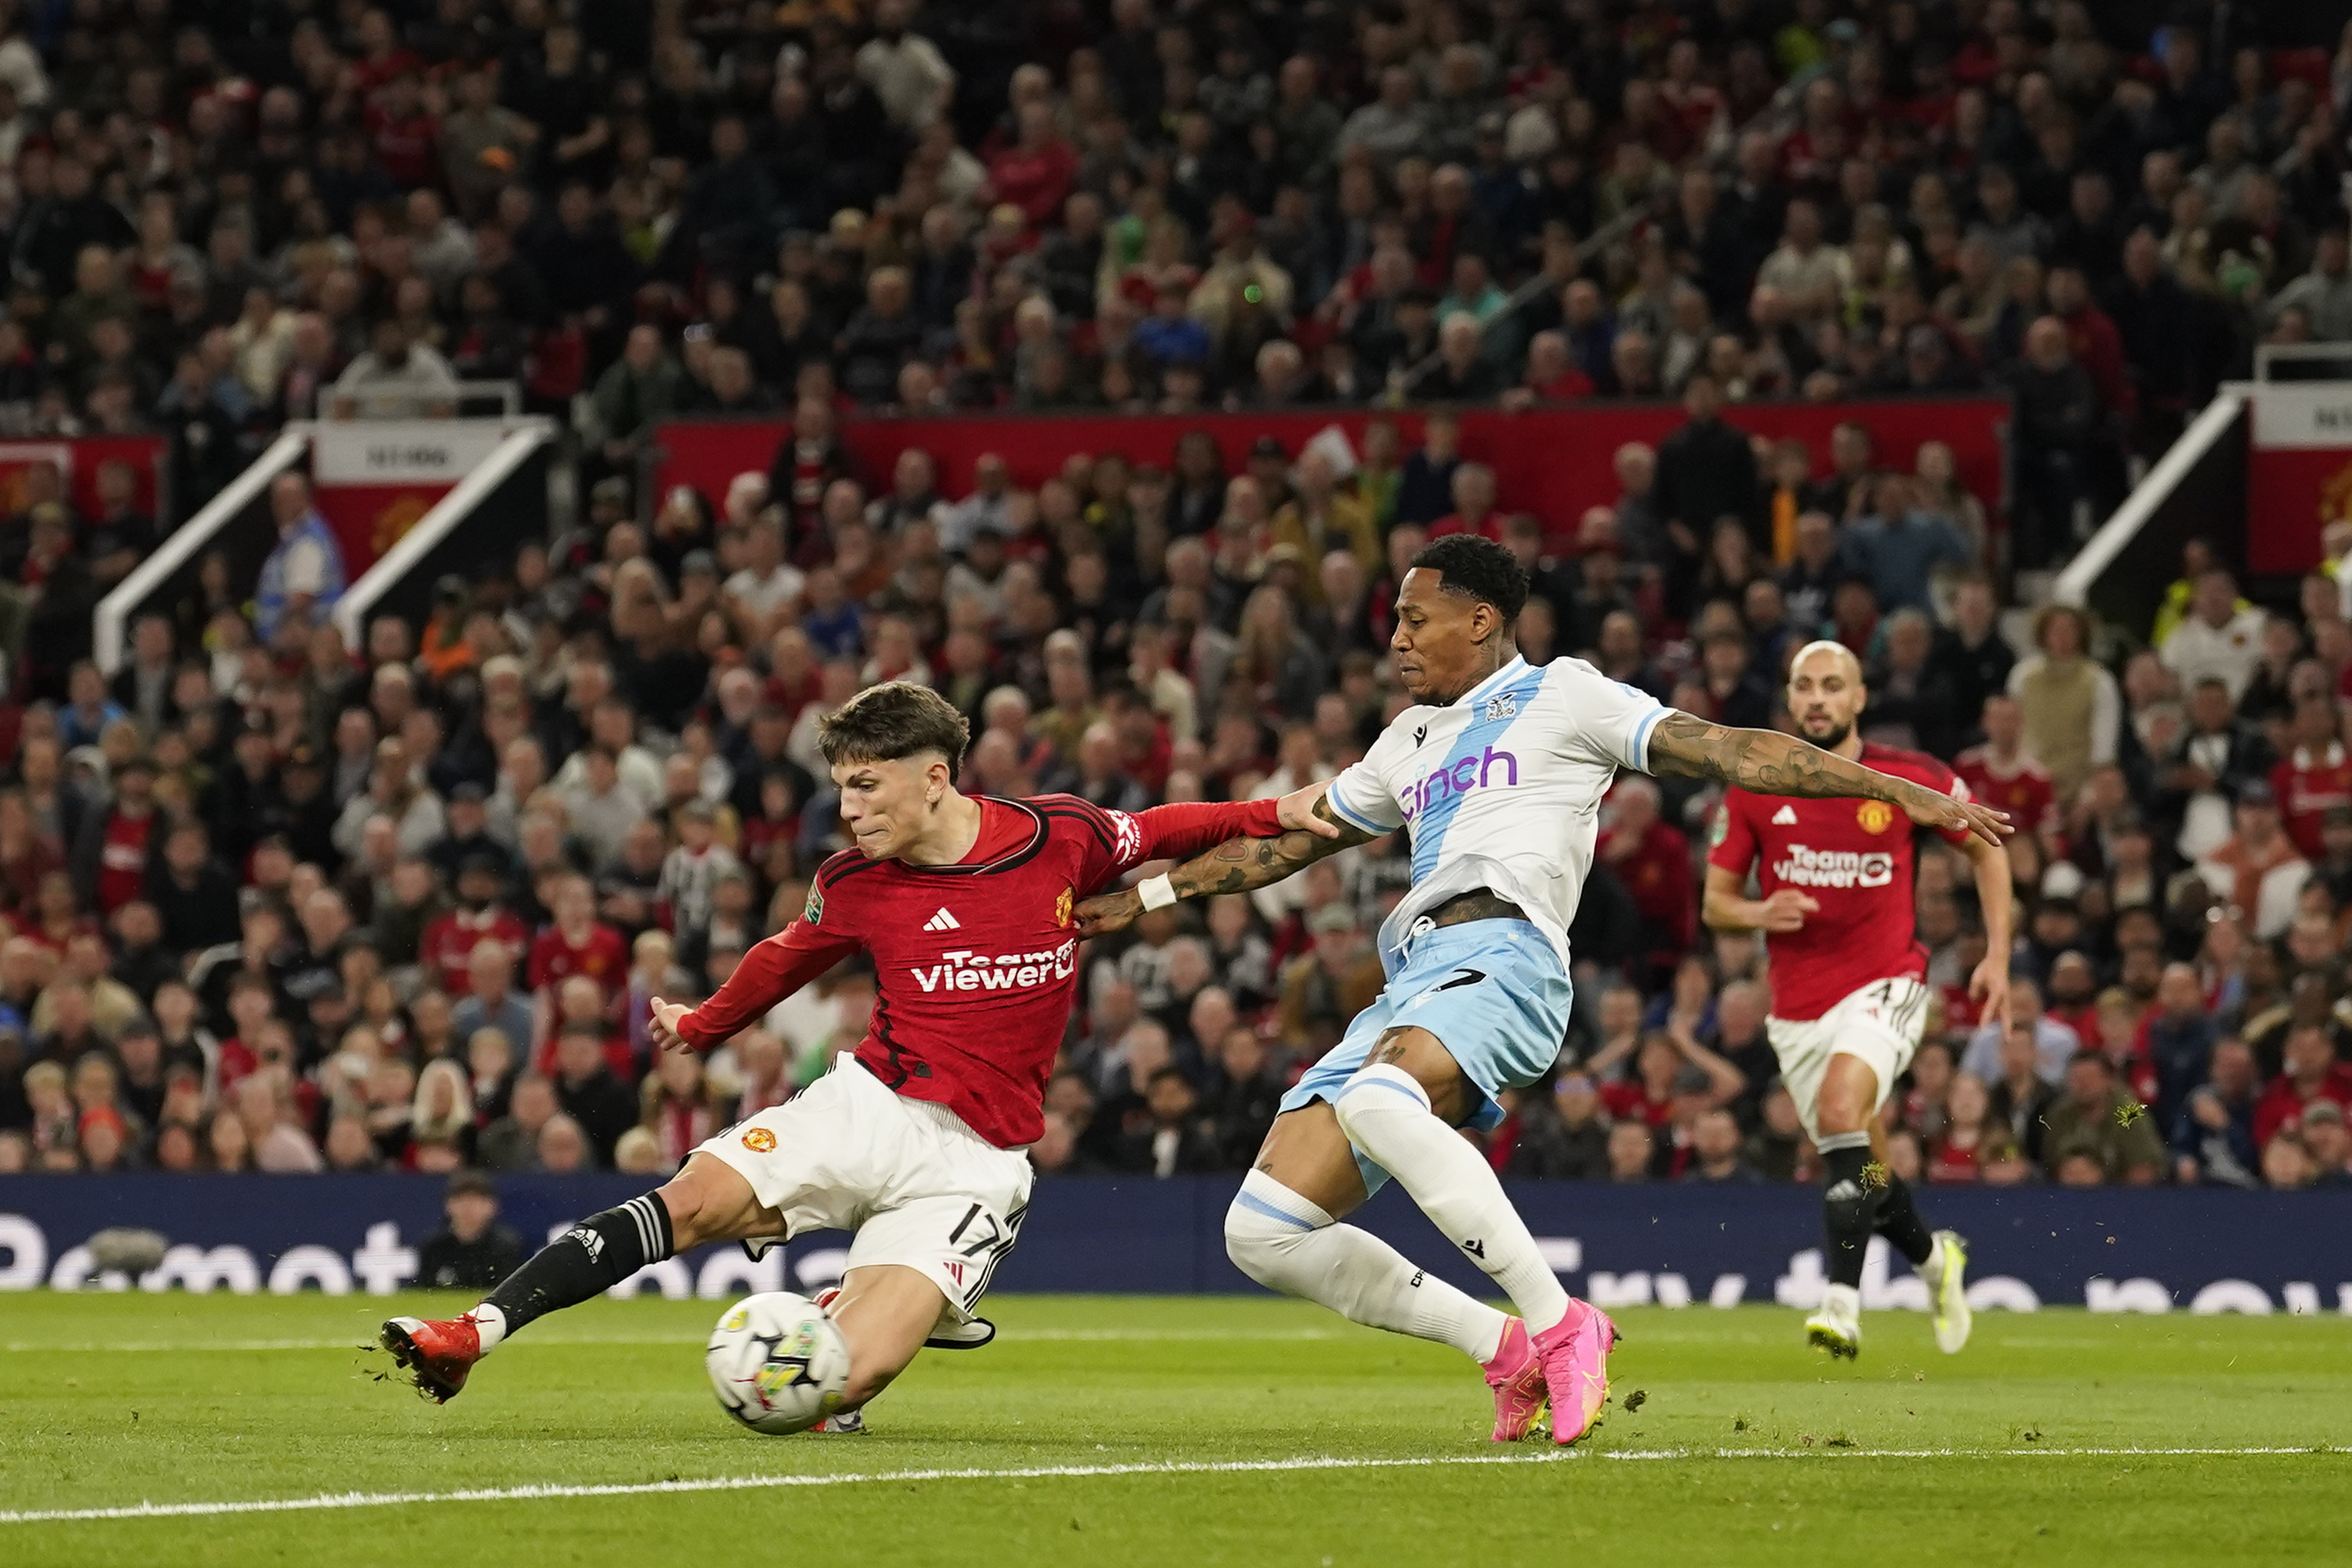 Manchester United vs Crystal Palace Premier League free live stream (9/30/23) How to watch, time, channel, betting odds